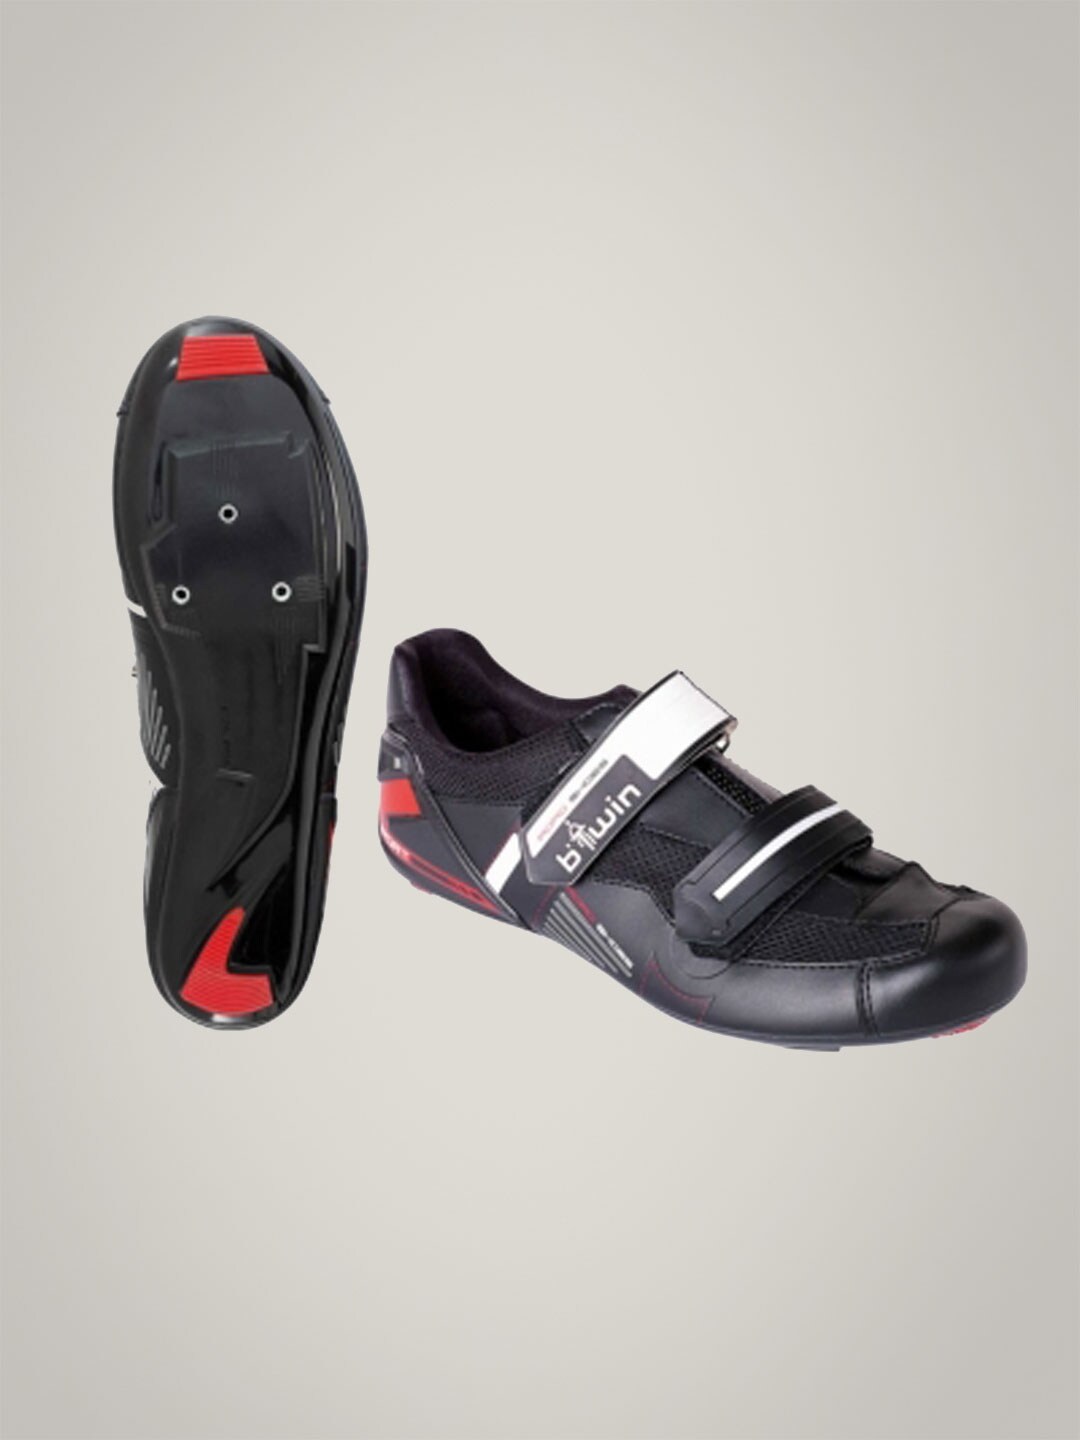 Btwin Road Shoes 5